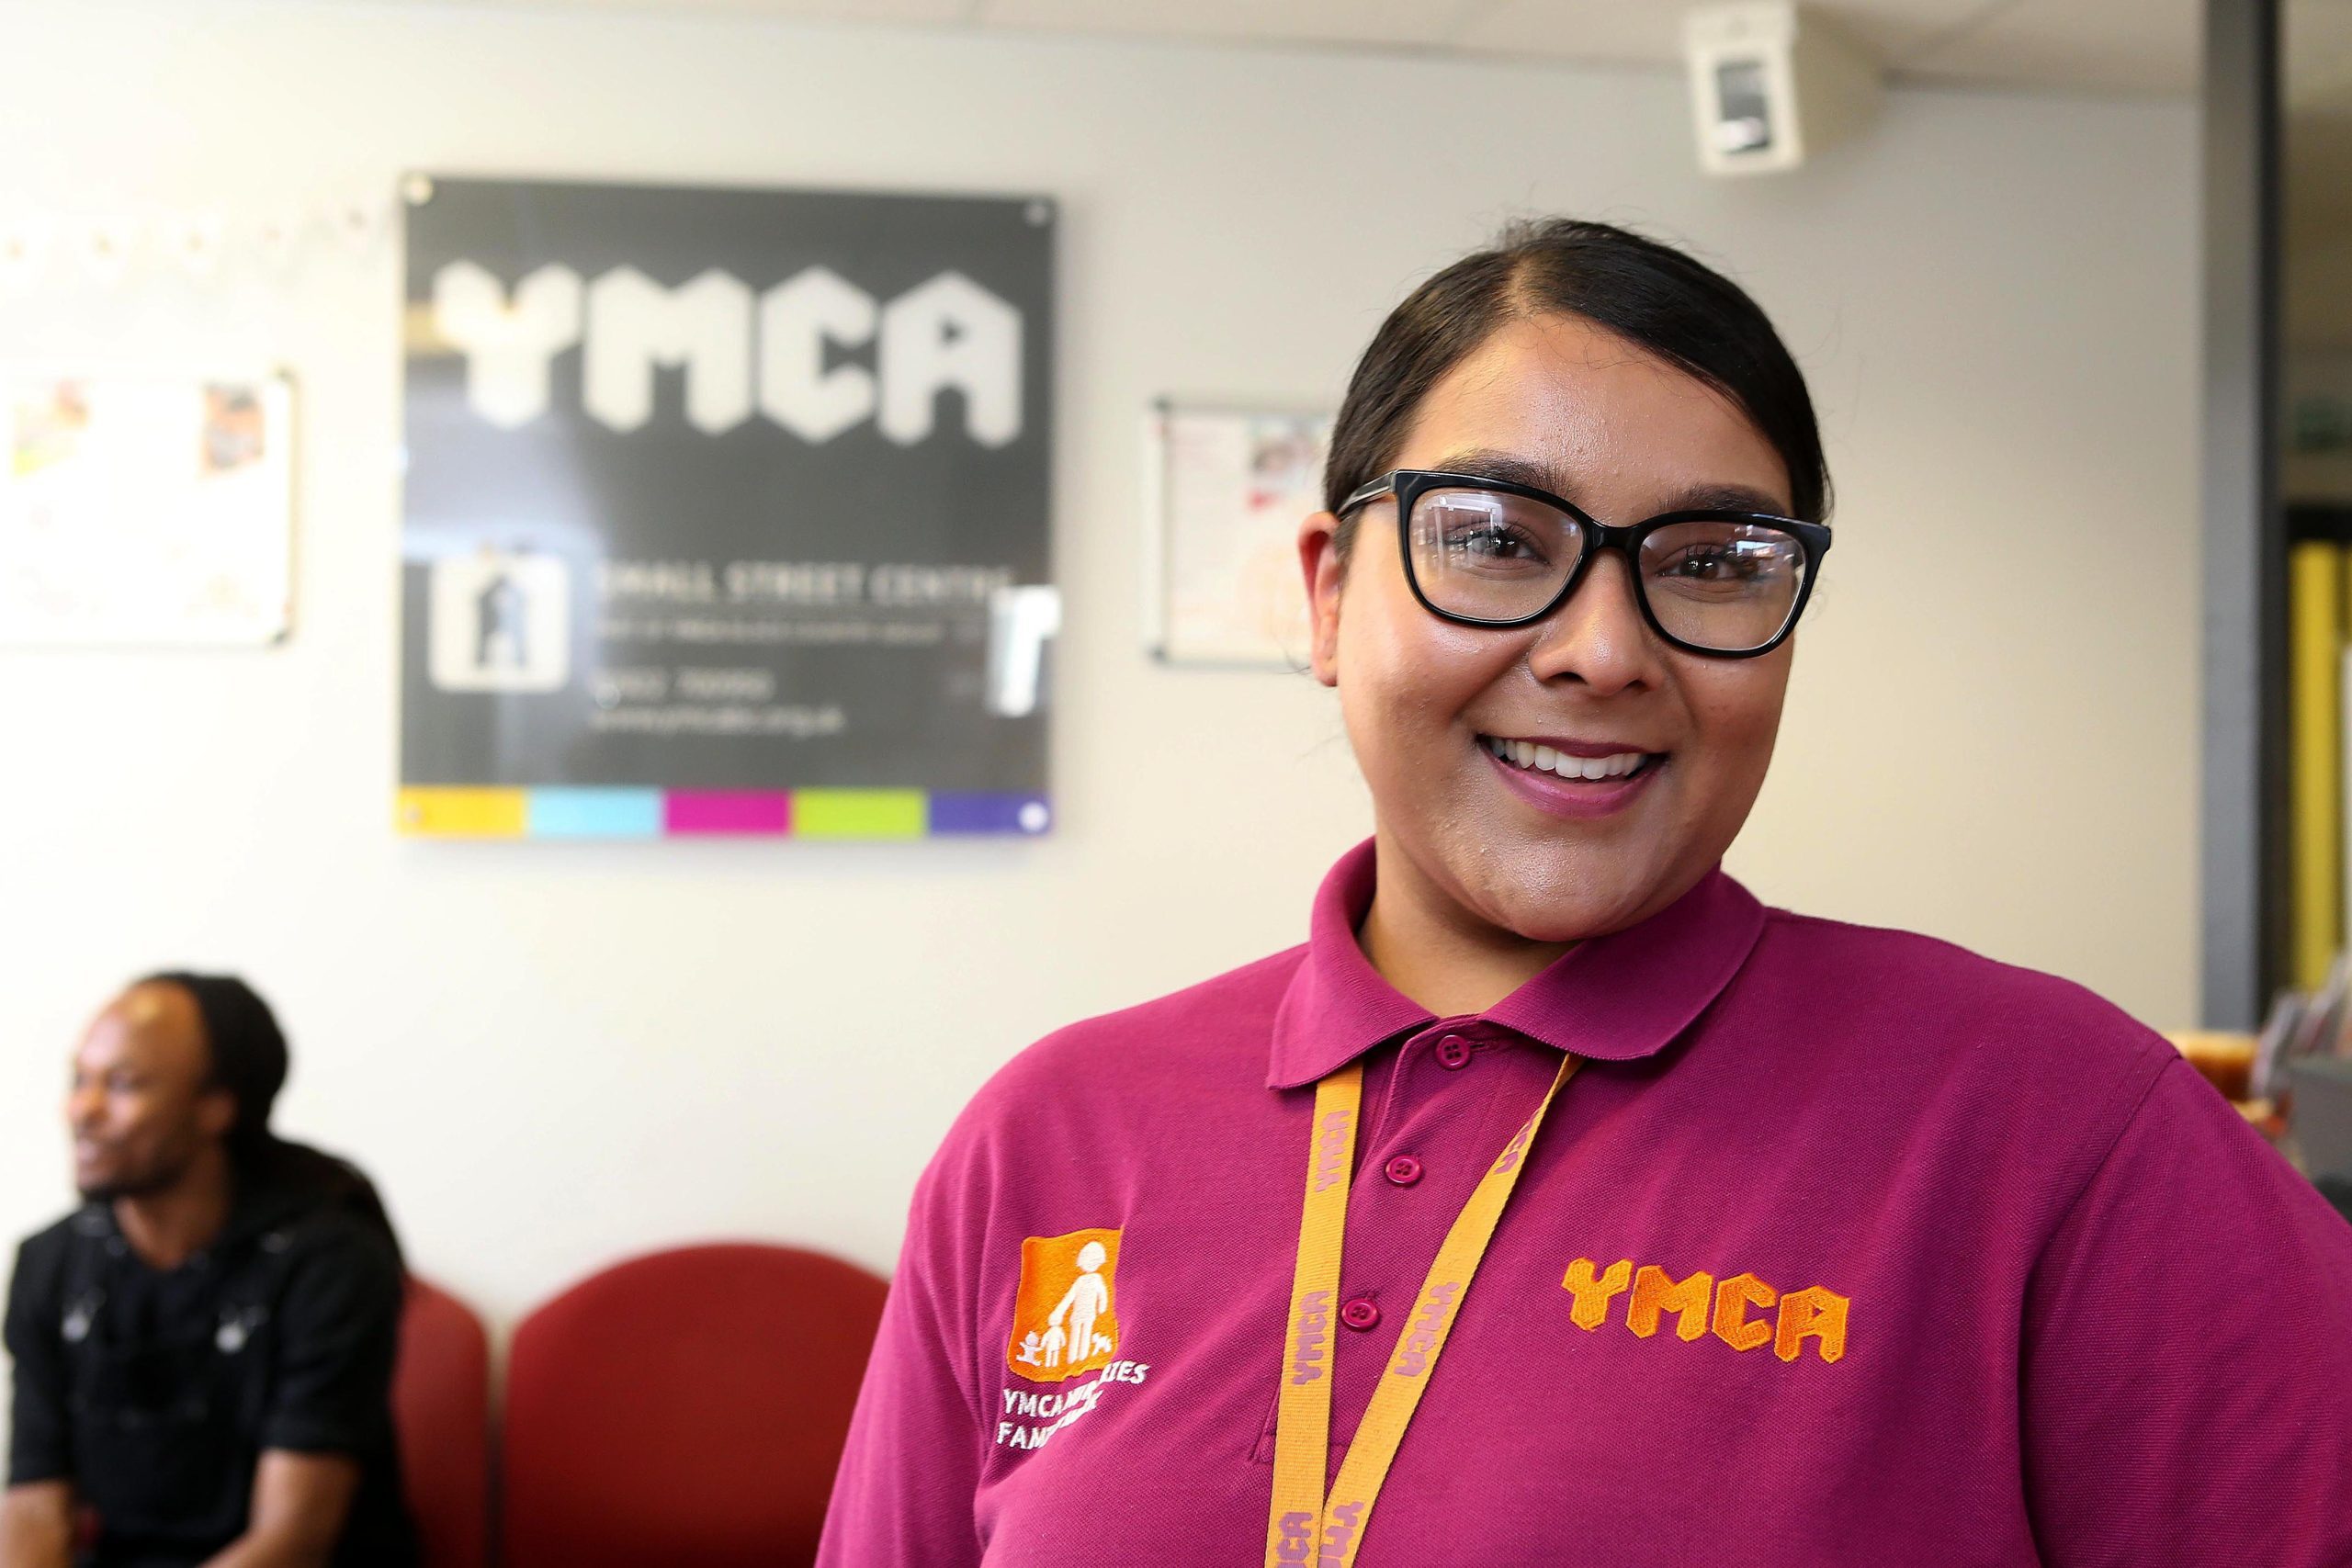 Smiling YMCA nursery staff member welcoming parents to reception